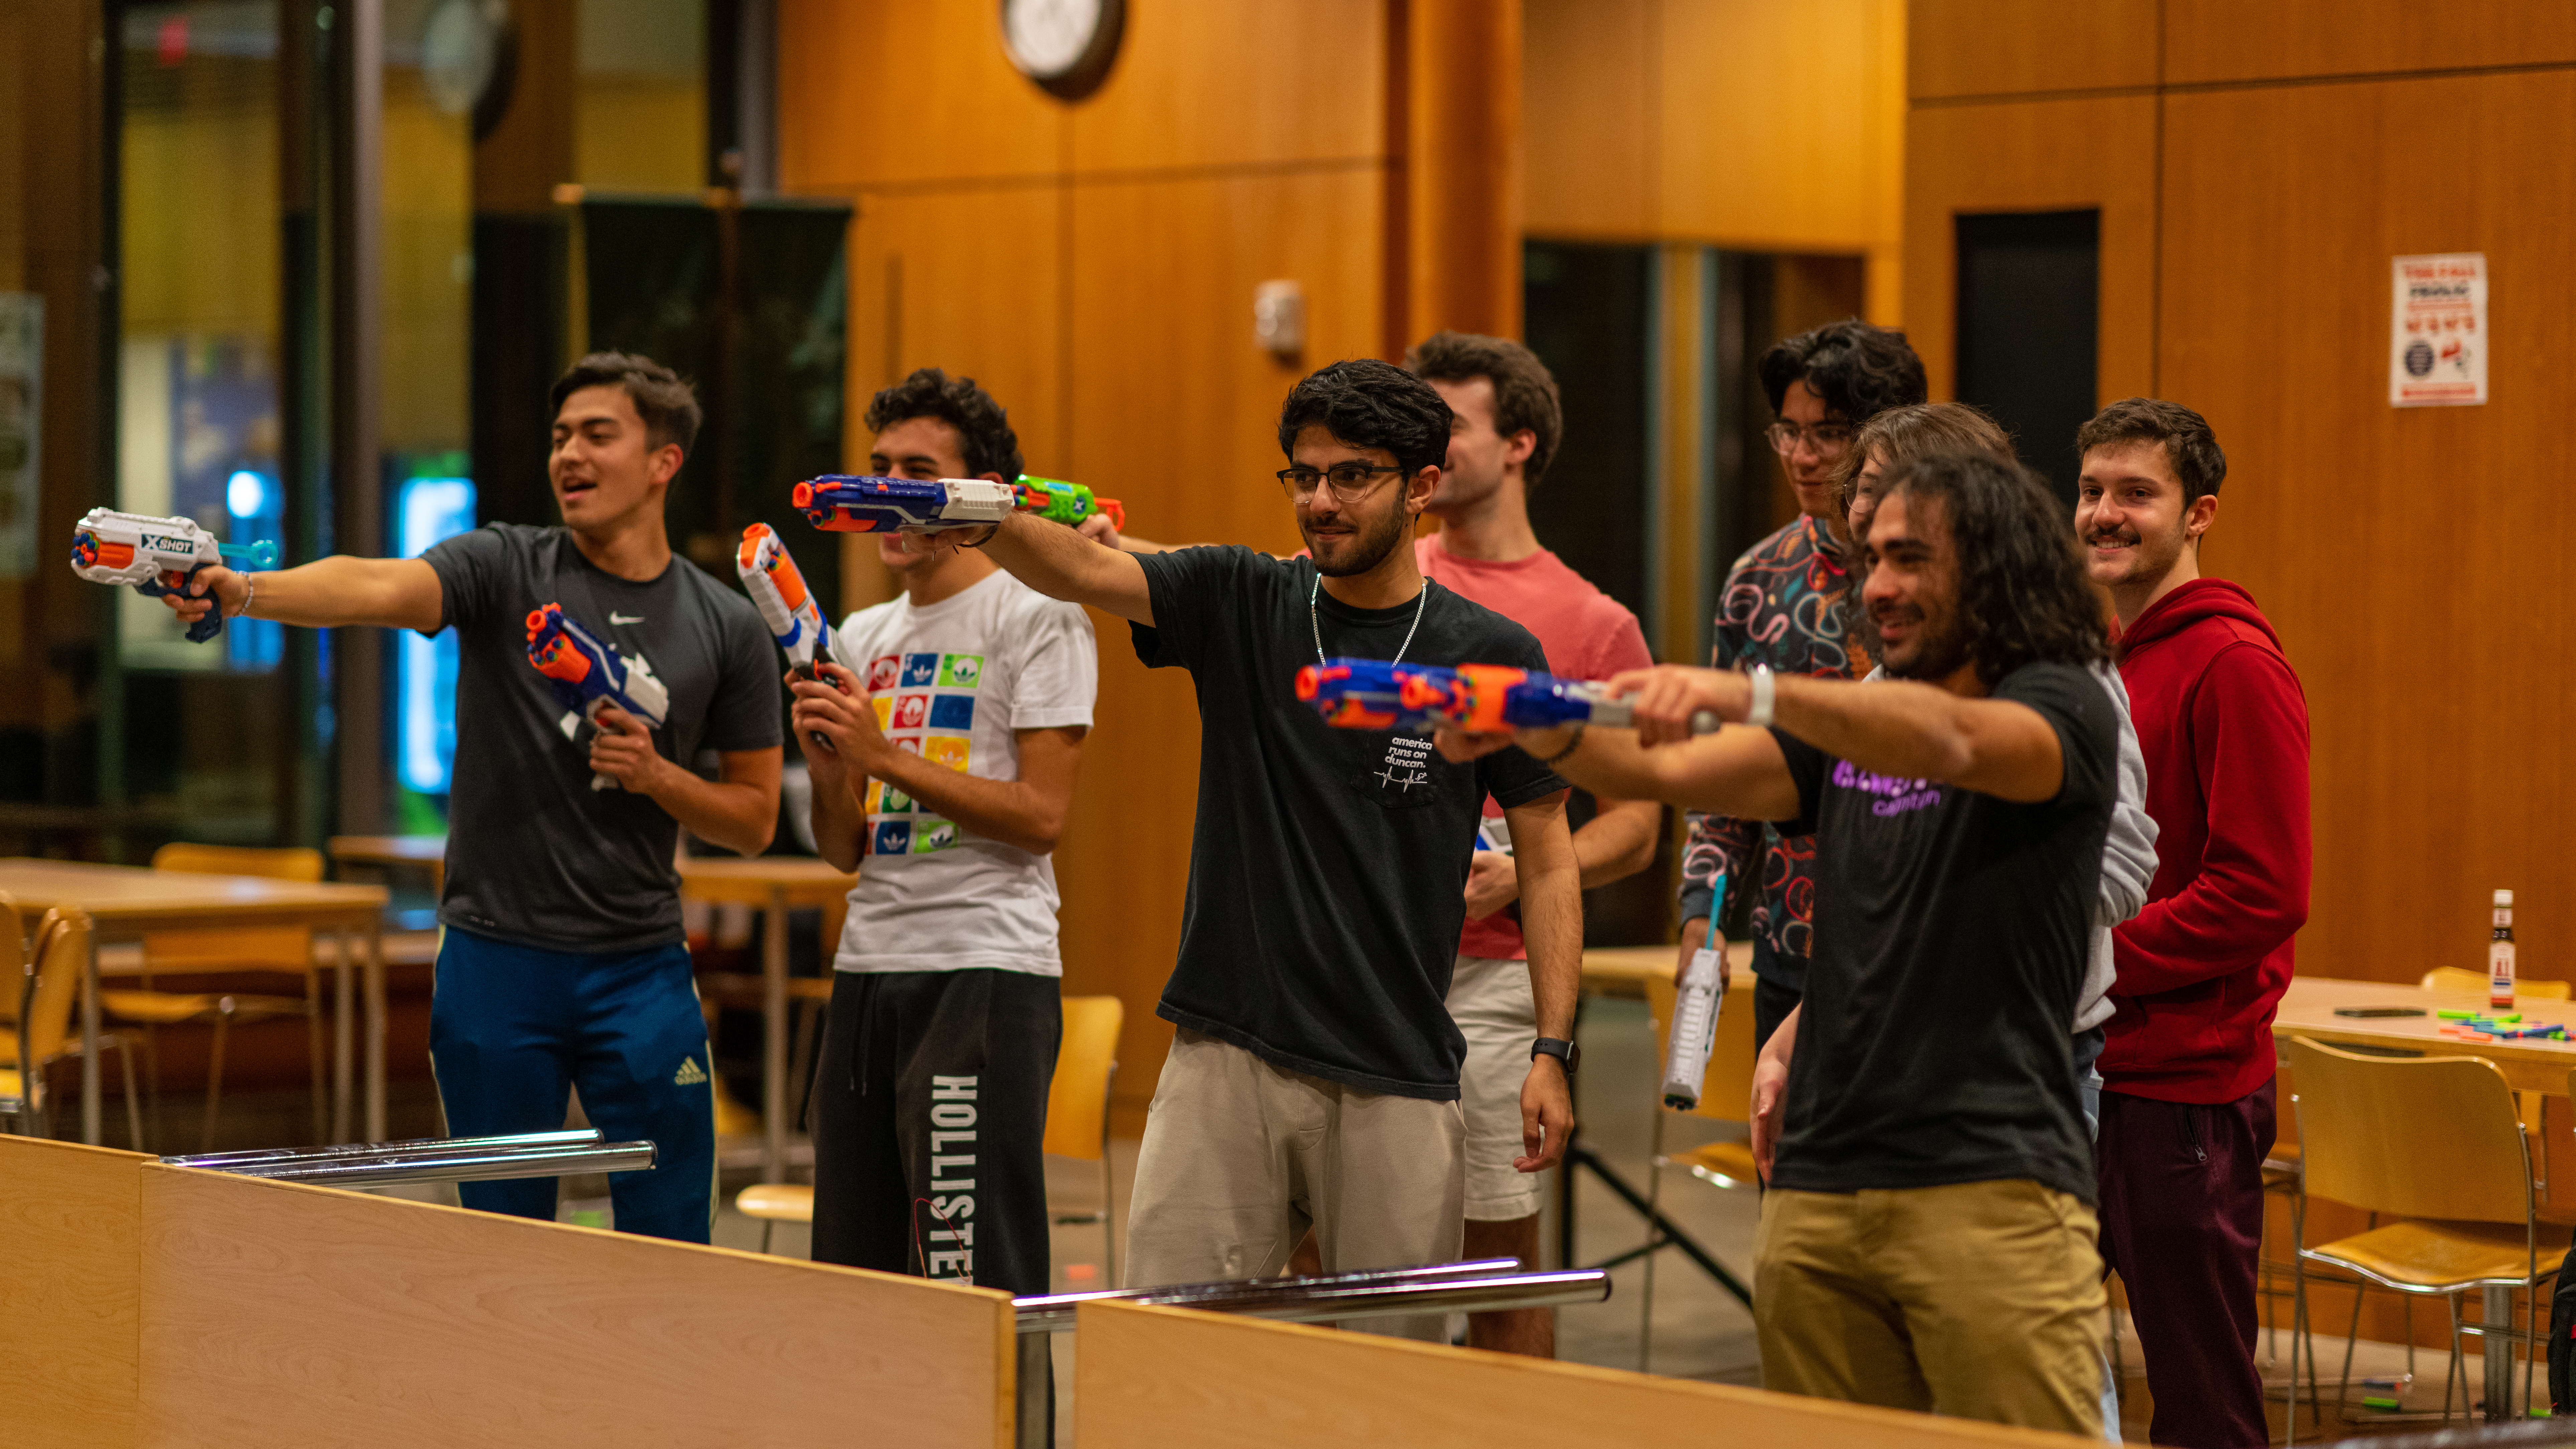 A group of students standing behind a table flipped to it's side, pointing their nerf weapons across the room.